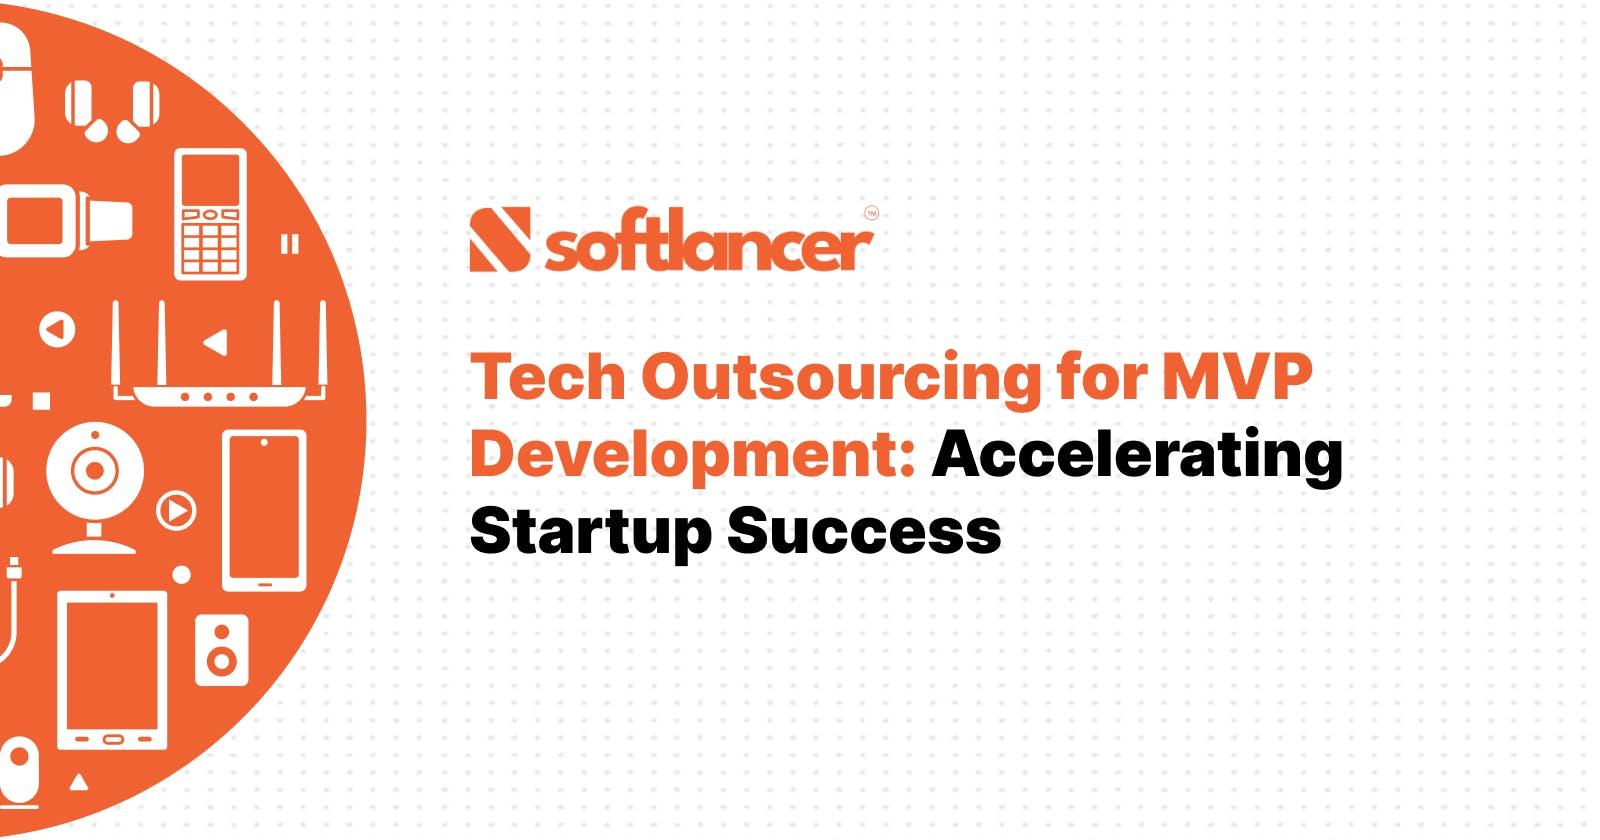 Tech Outsourcing for MVP Development: Accelerating Startup Success